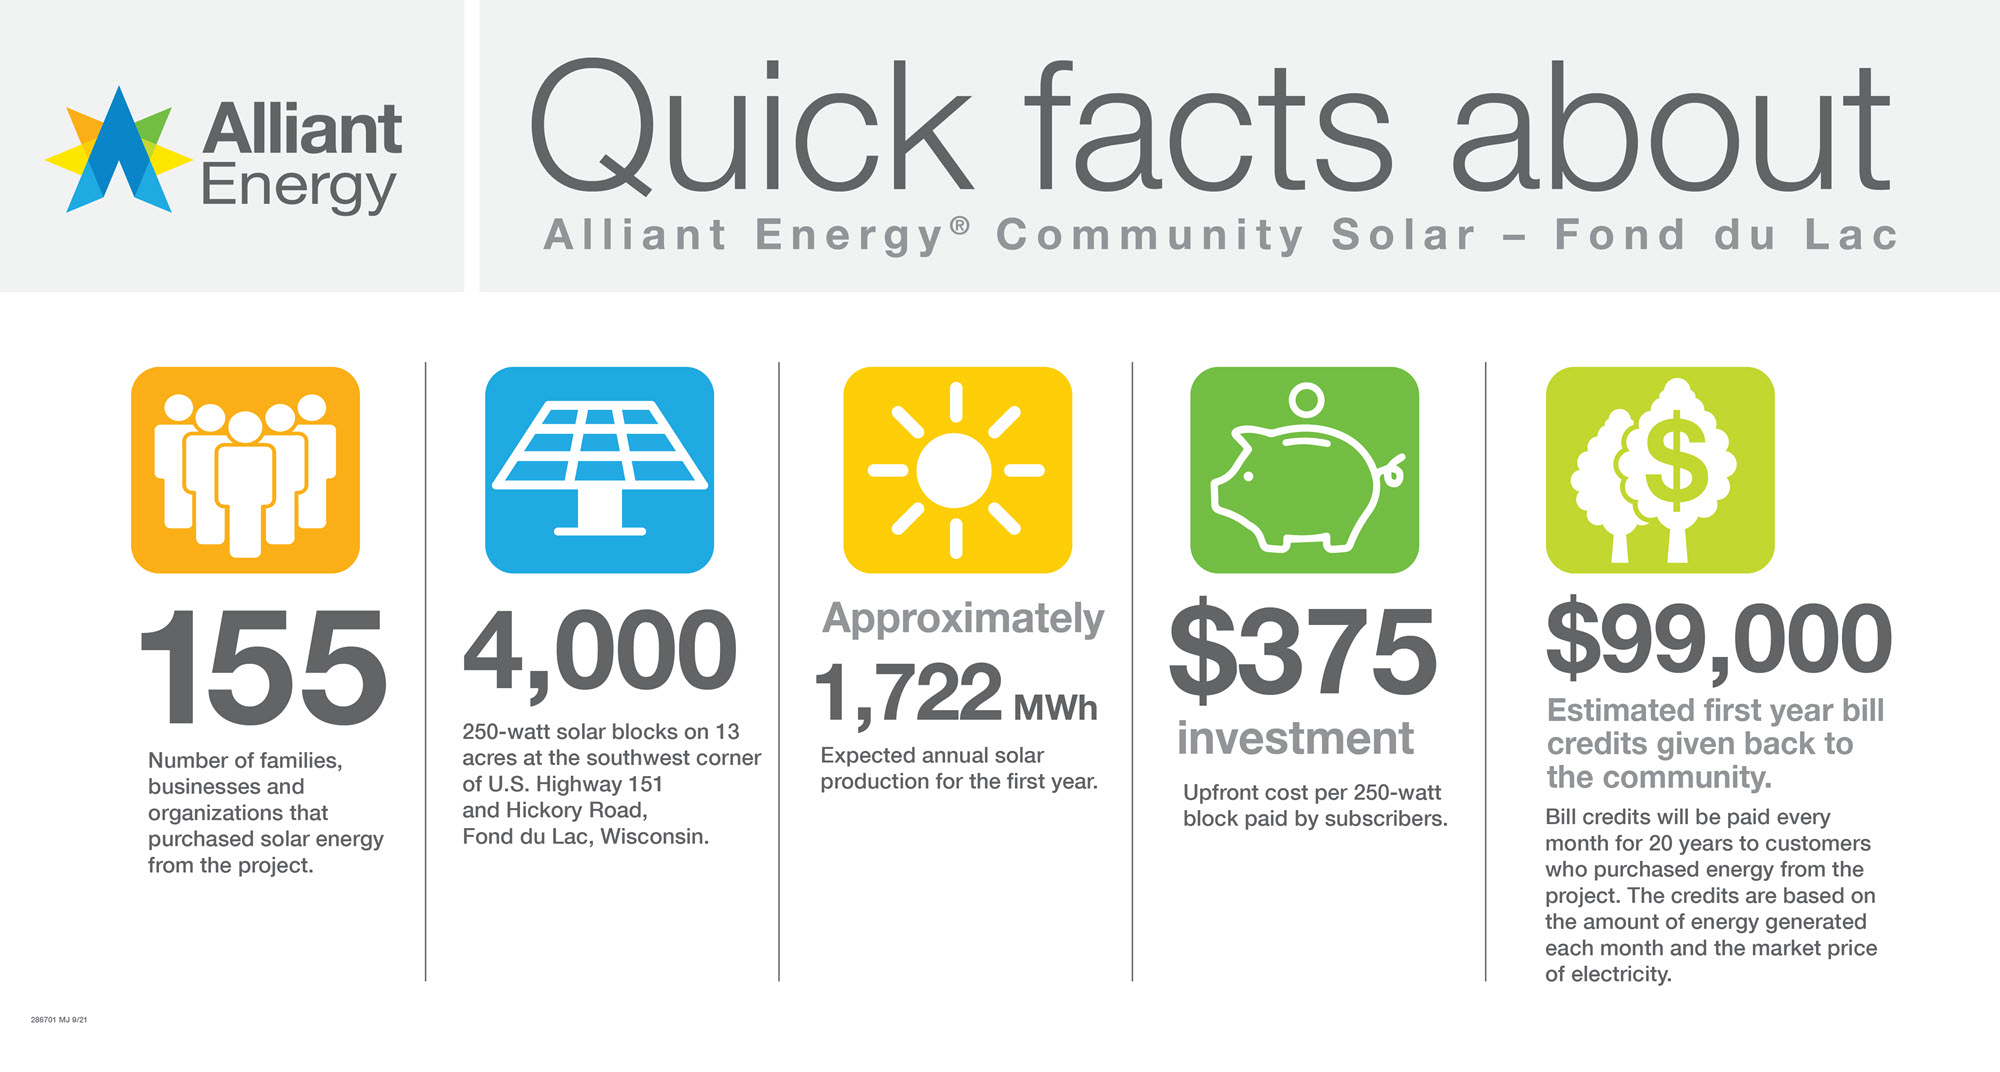 alliant-energy-seeks-to-quell-a-municipal-uprising-in-iowa-daily